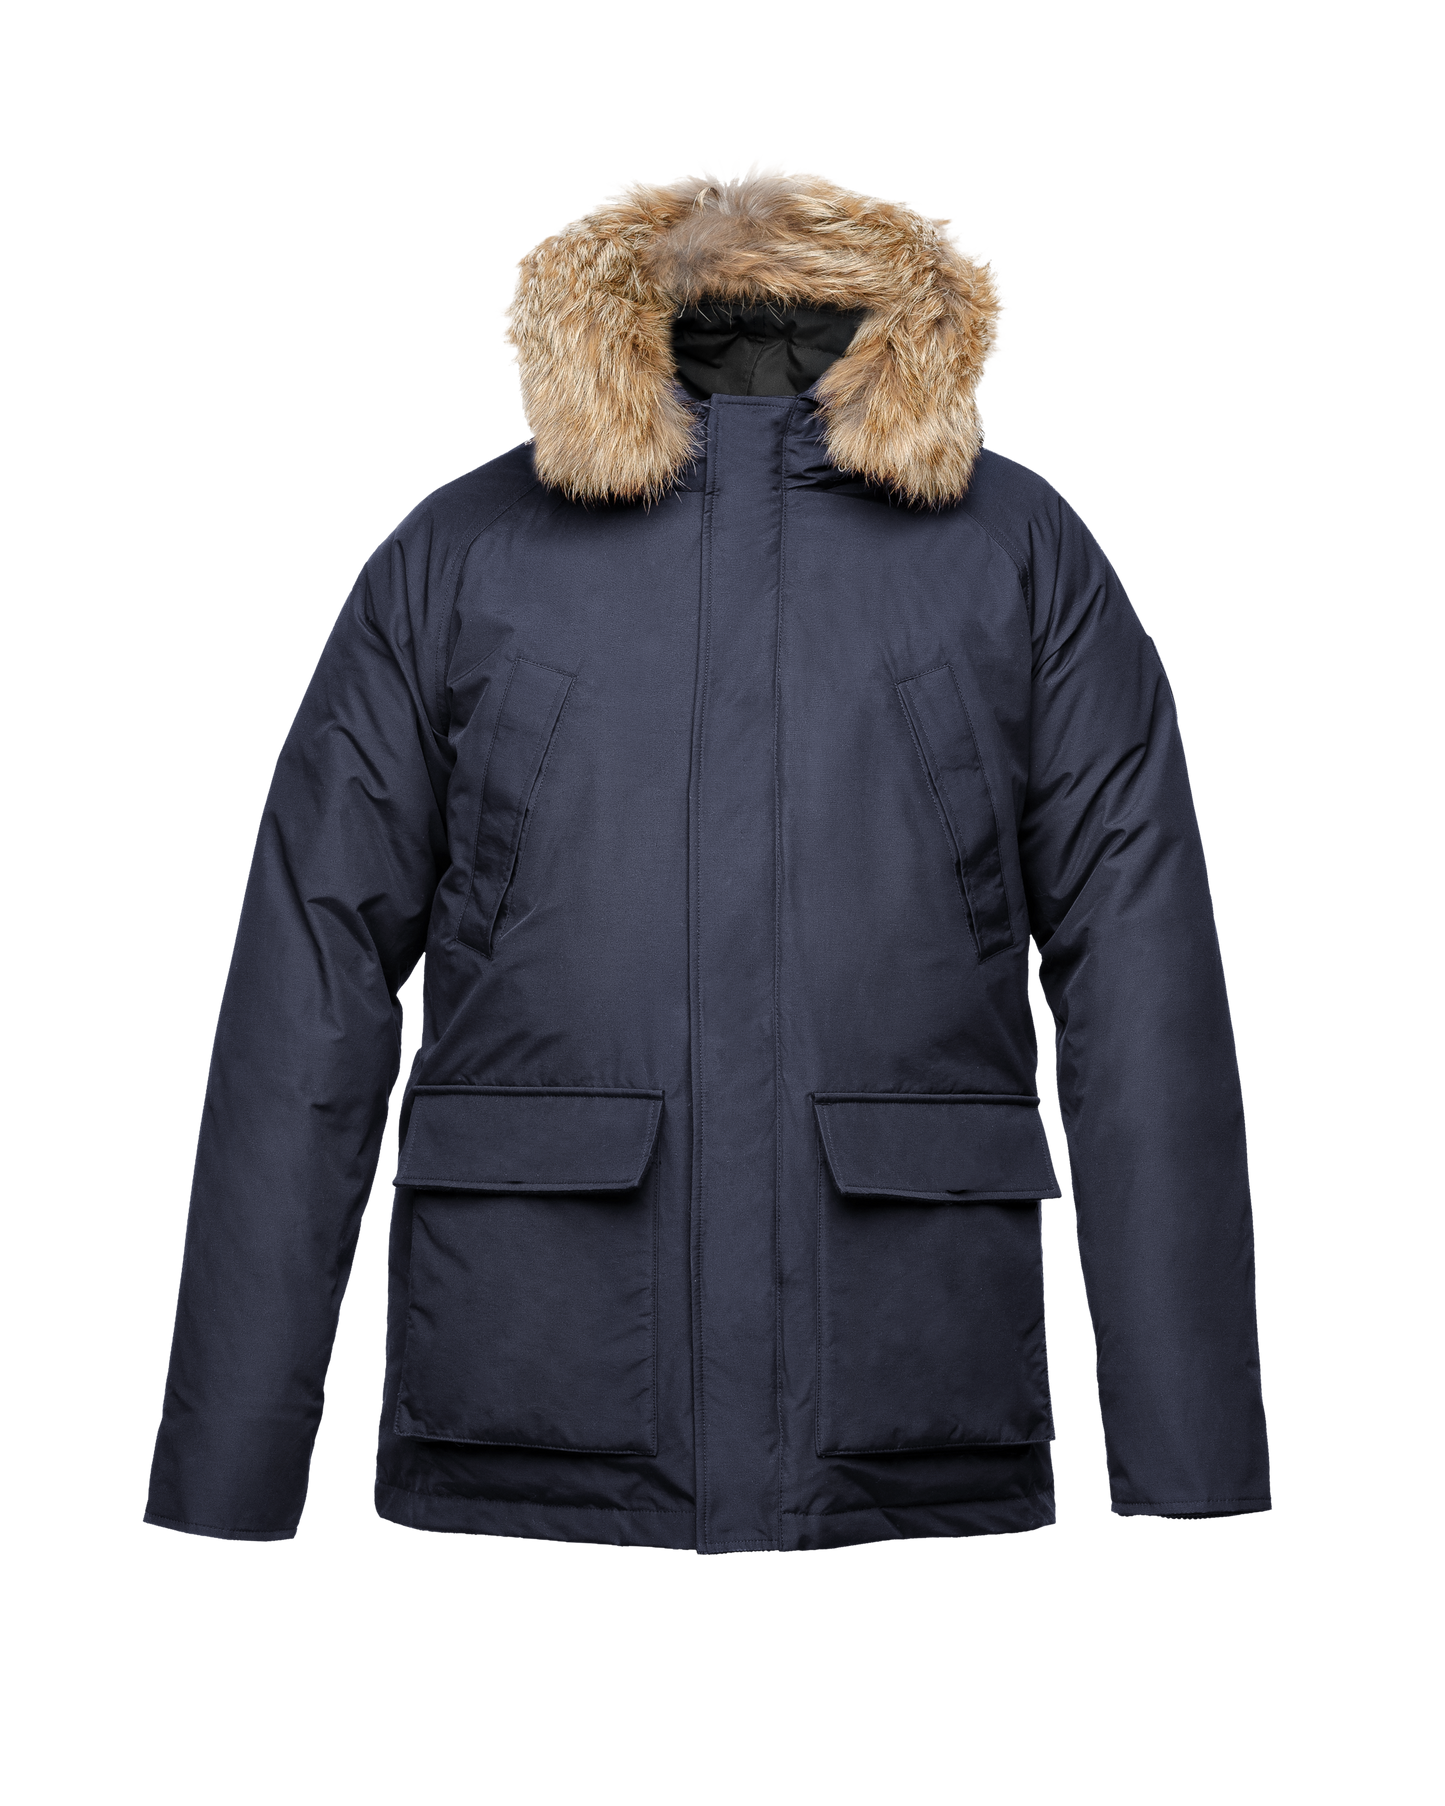 Men's waist length down filled jacket with two front pockets with magnetic closure and a removable fur trim on the hood in CH Navy